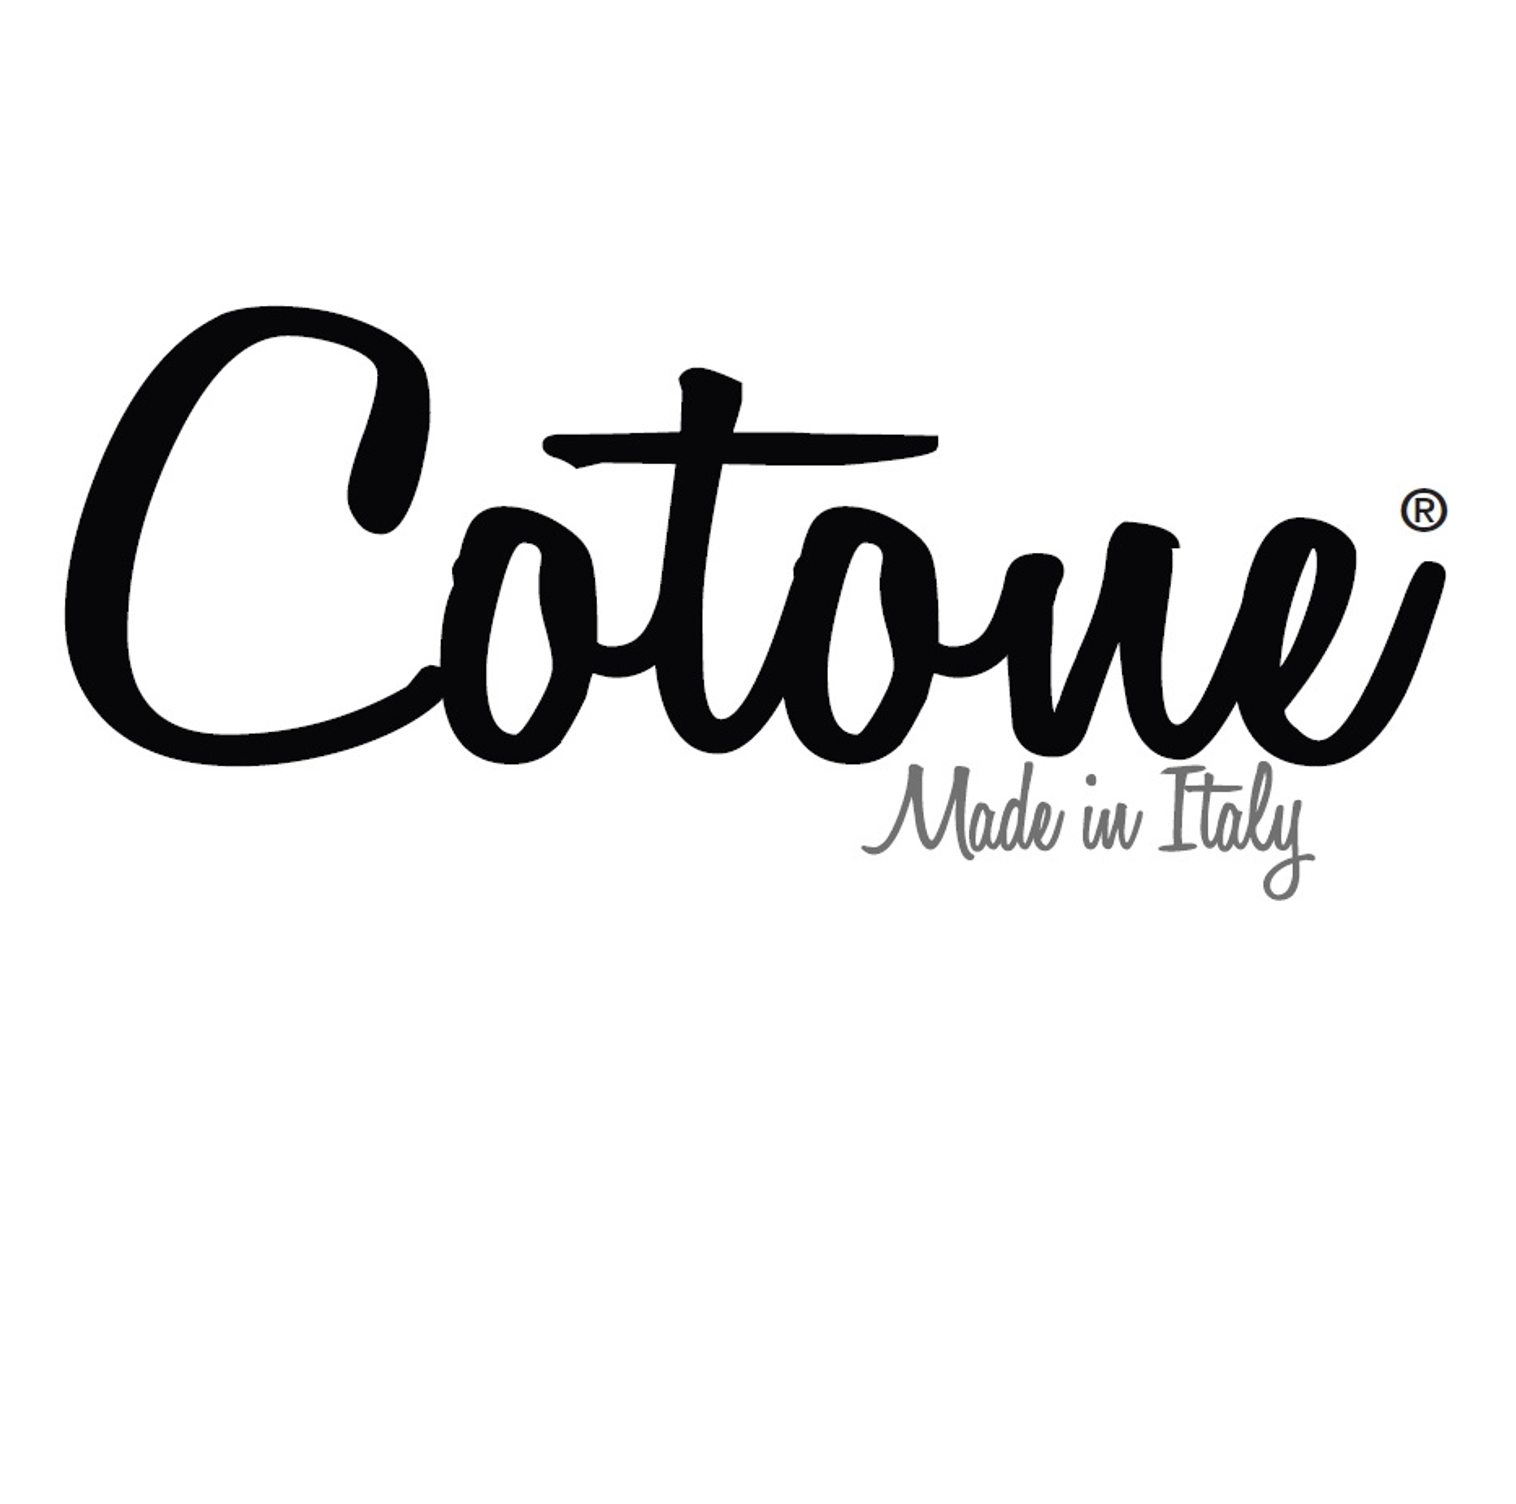 COTONE® MADE IN ITALY